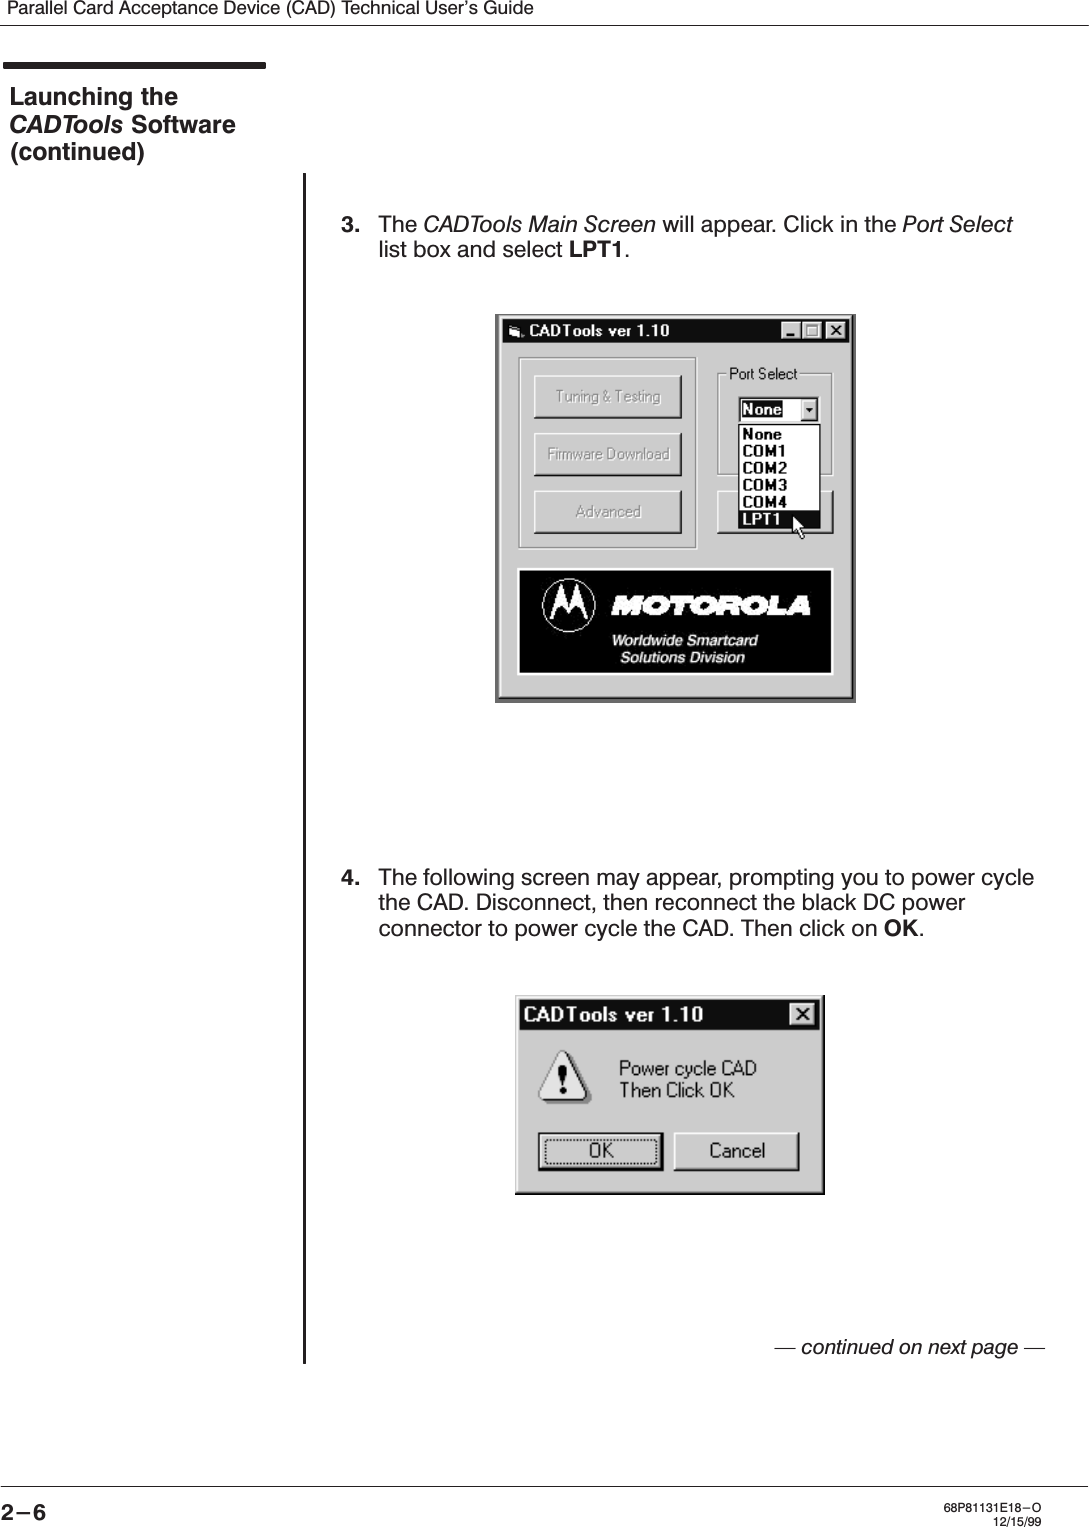 Parallel Card Acceptance Device (CAD) Technical User&apos;s Guide2-6 68P81131E18-O12/15/99Launching theCADTools Software(continued)3. The CADTools Main Screen will appear. Click in the Port Selectlist box and select LPT1.4. The following screen may appear, prompting you to power cyclethe CAD. Disconnect, then reconnect the black DC powerconnector to power cycle the CAD. Then click on OK.Ċ continued on next page Ċ